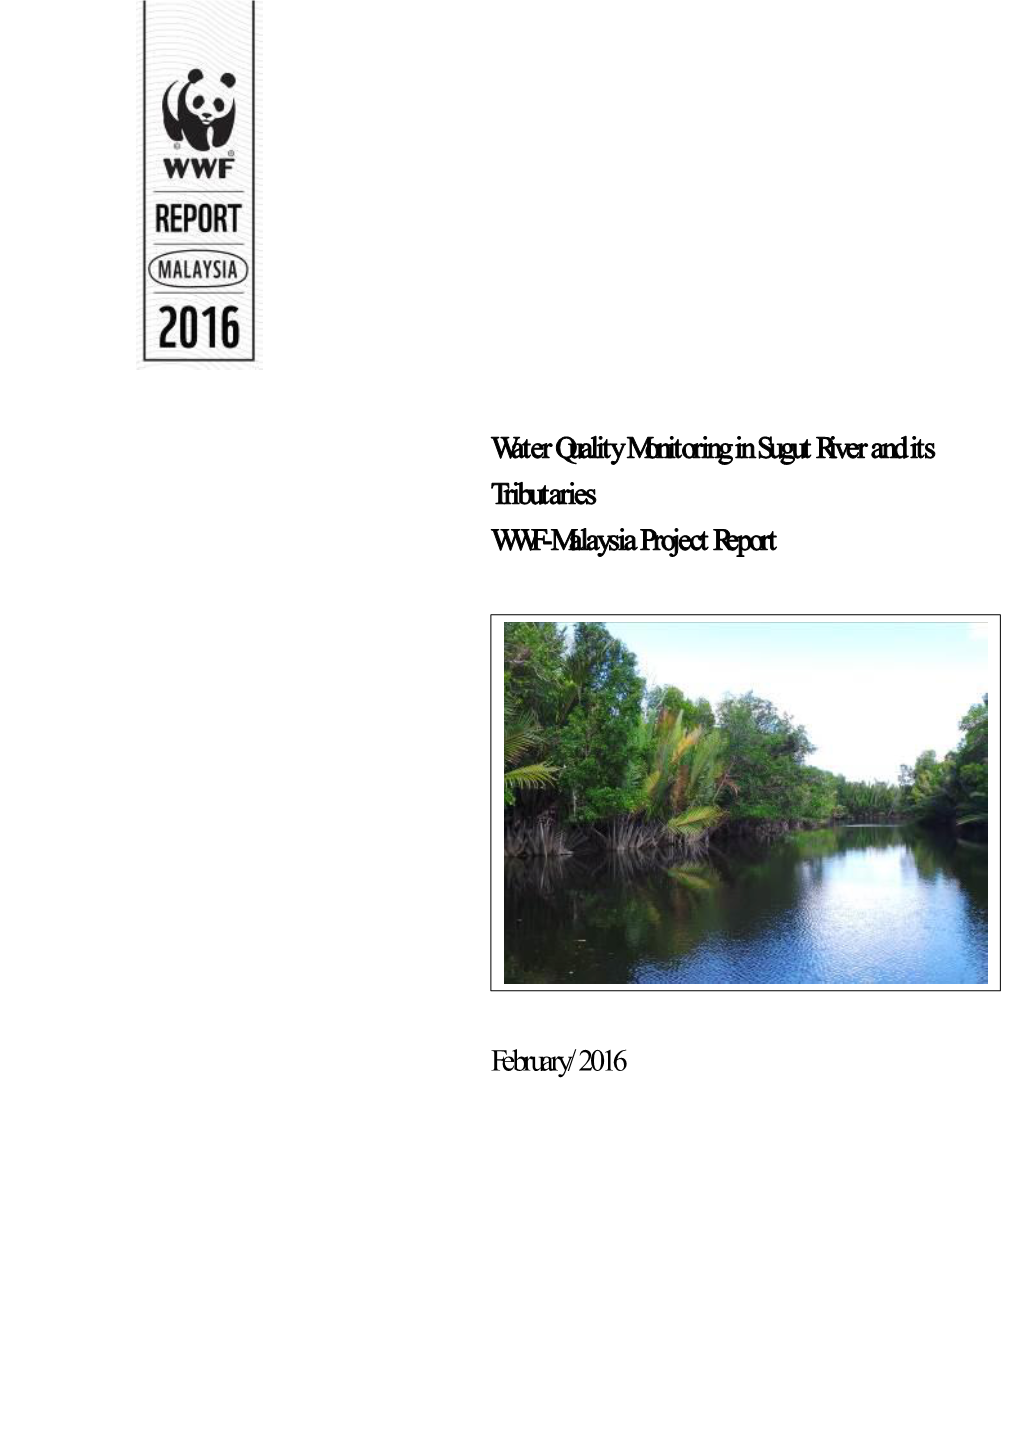 Water Quality Monitoring in Sugut River and Its Tributaries WWF-Malaysia Project Report